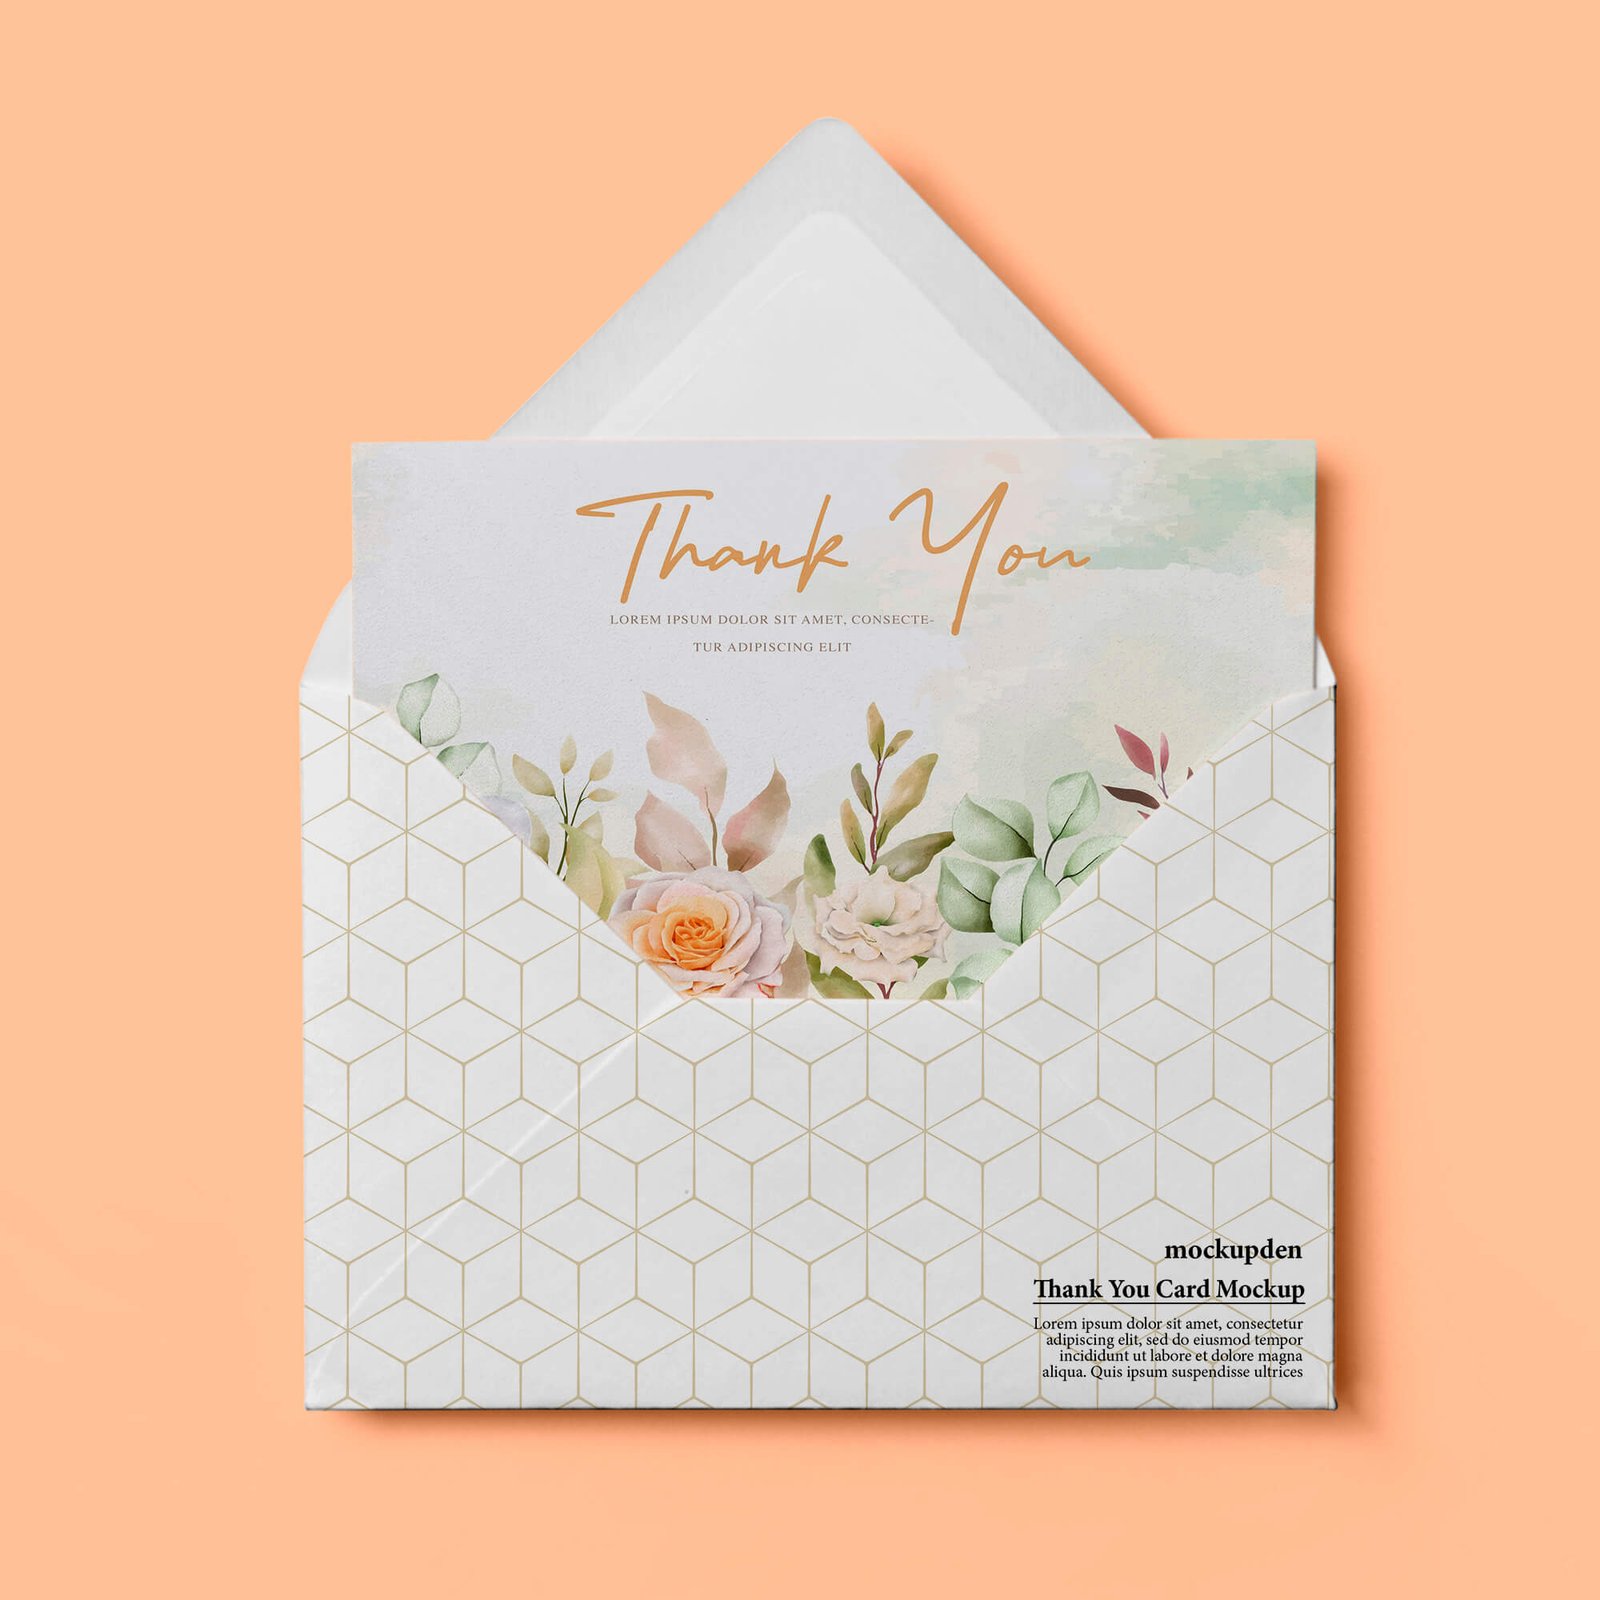 Design Free Thank You Card Mockup PSD Template